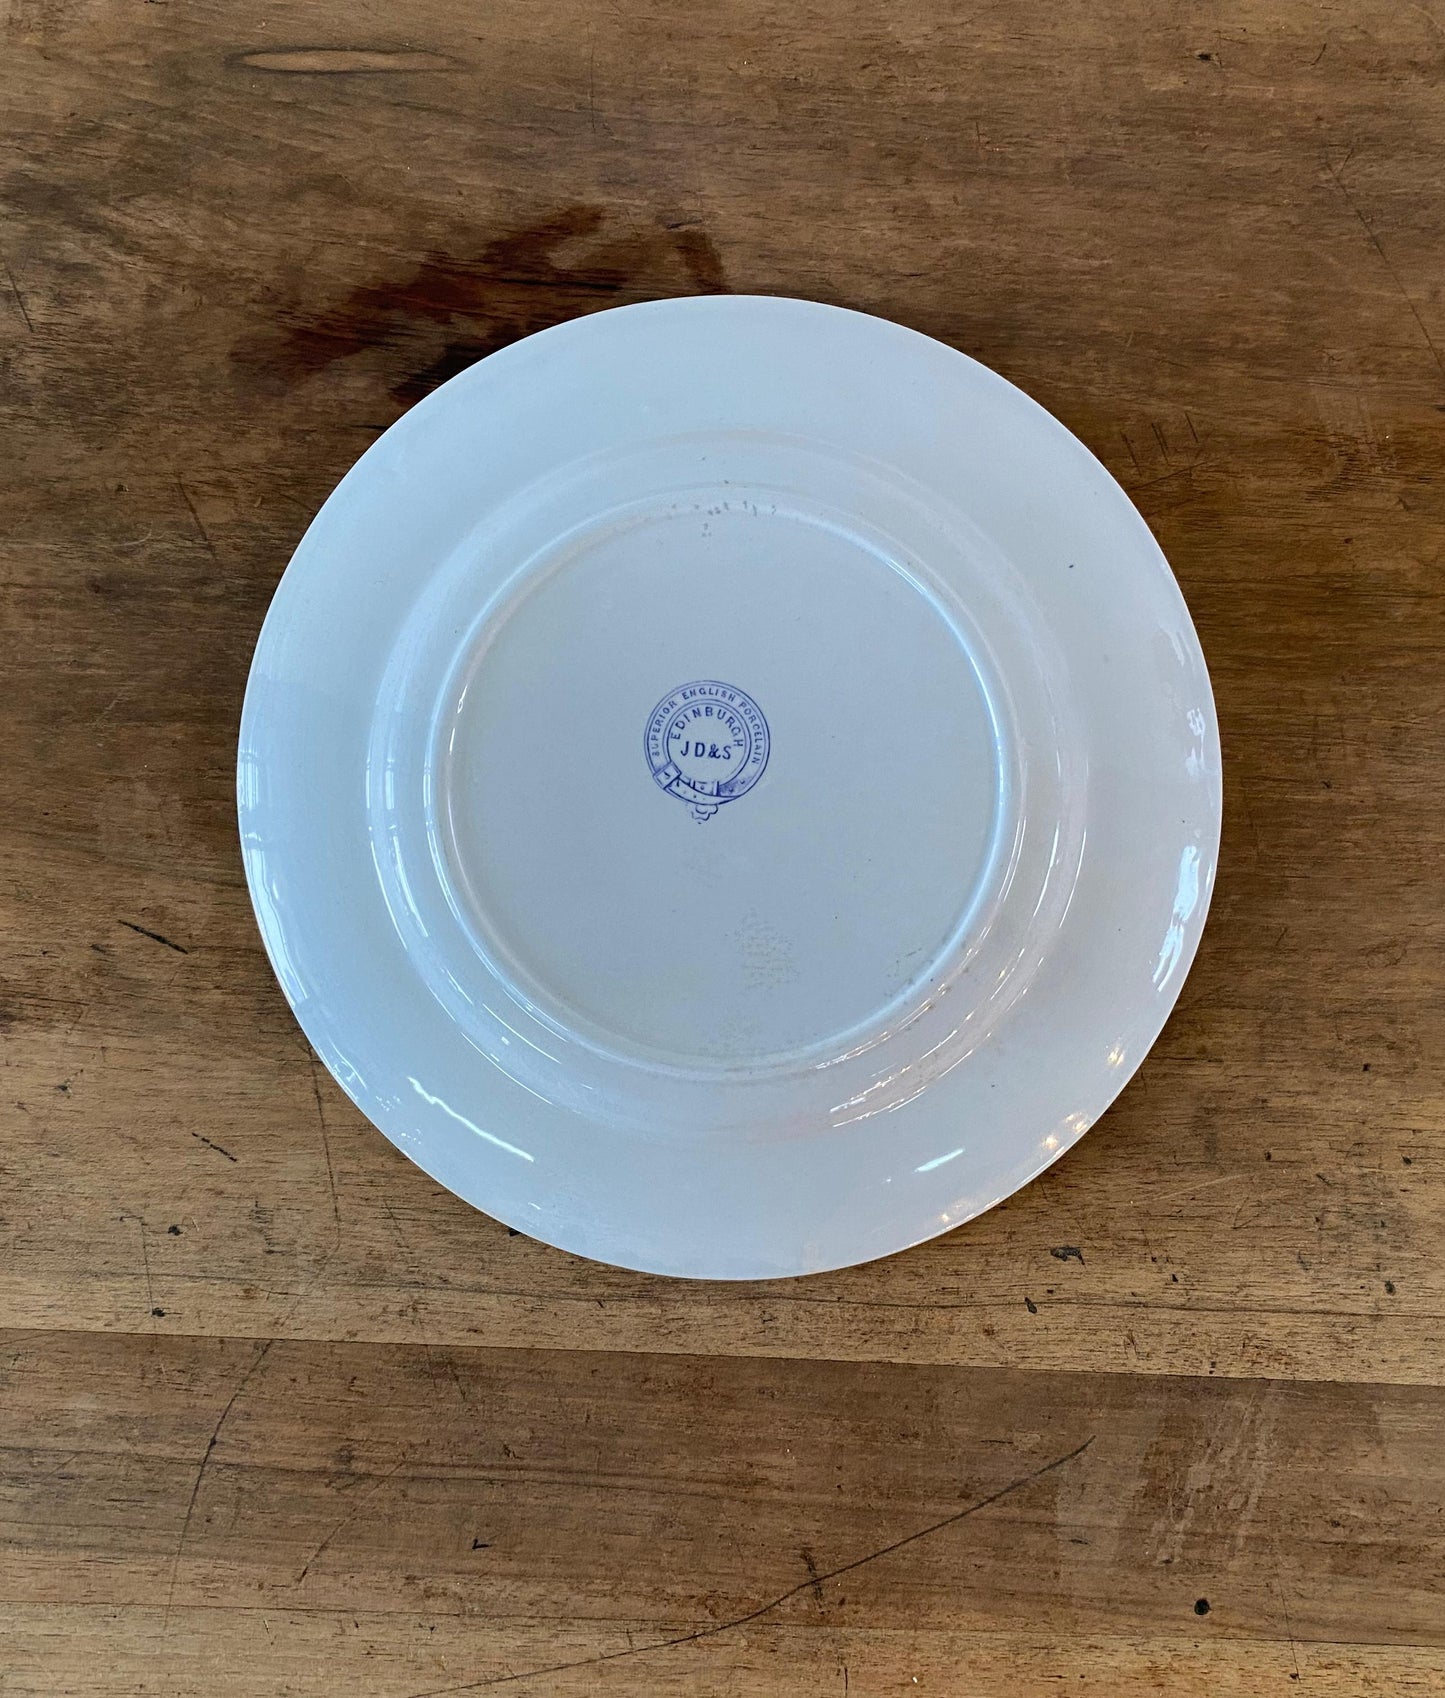 Antique"UD & S"Plate